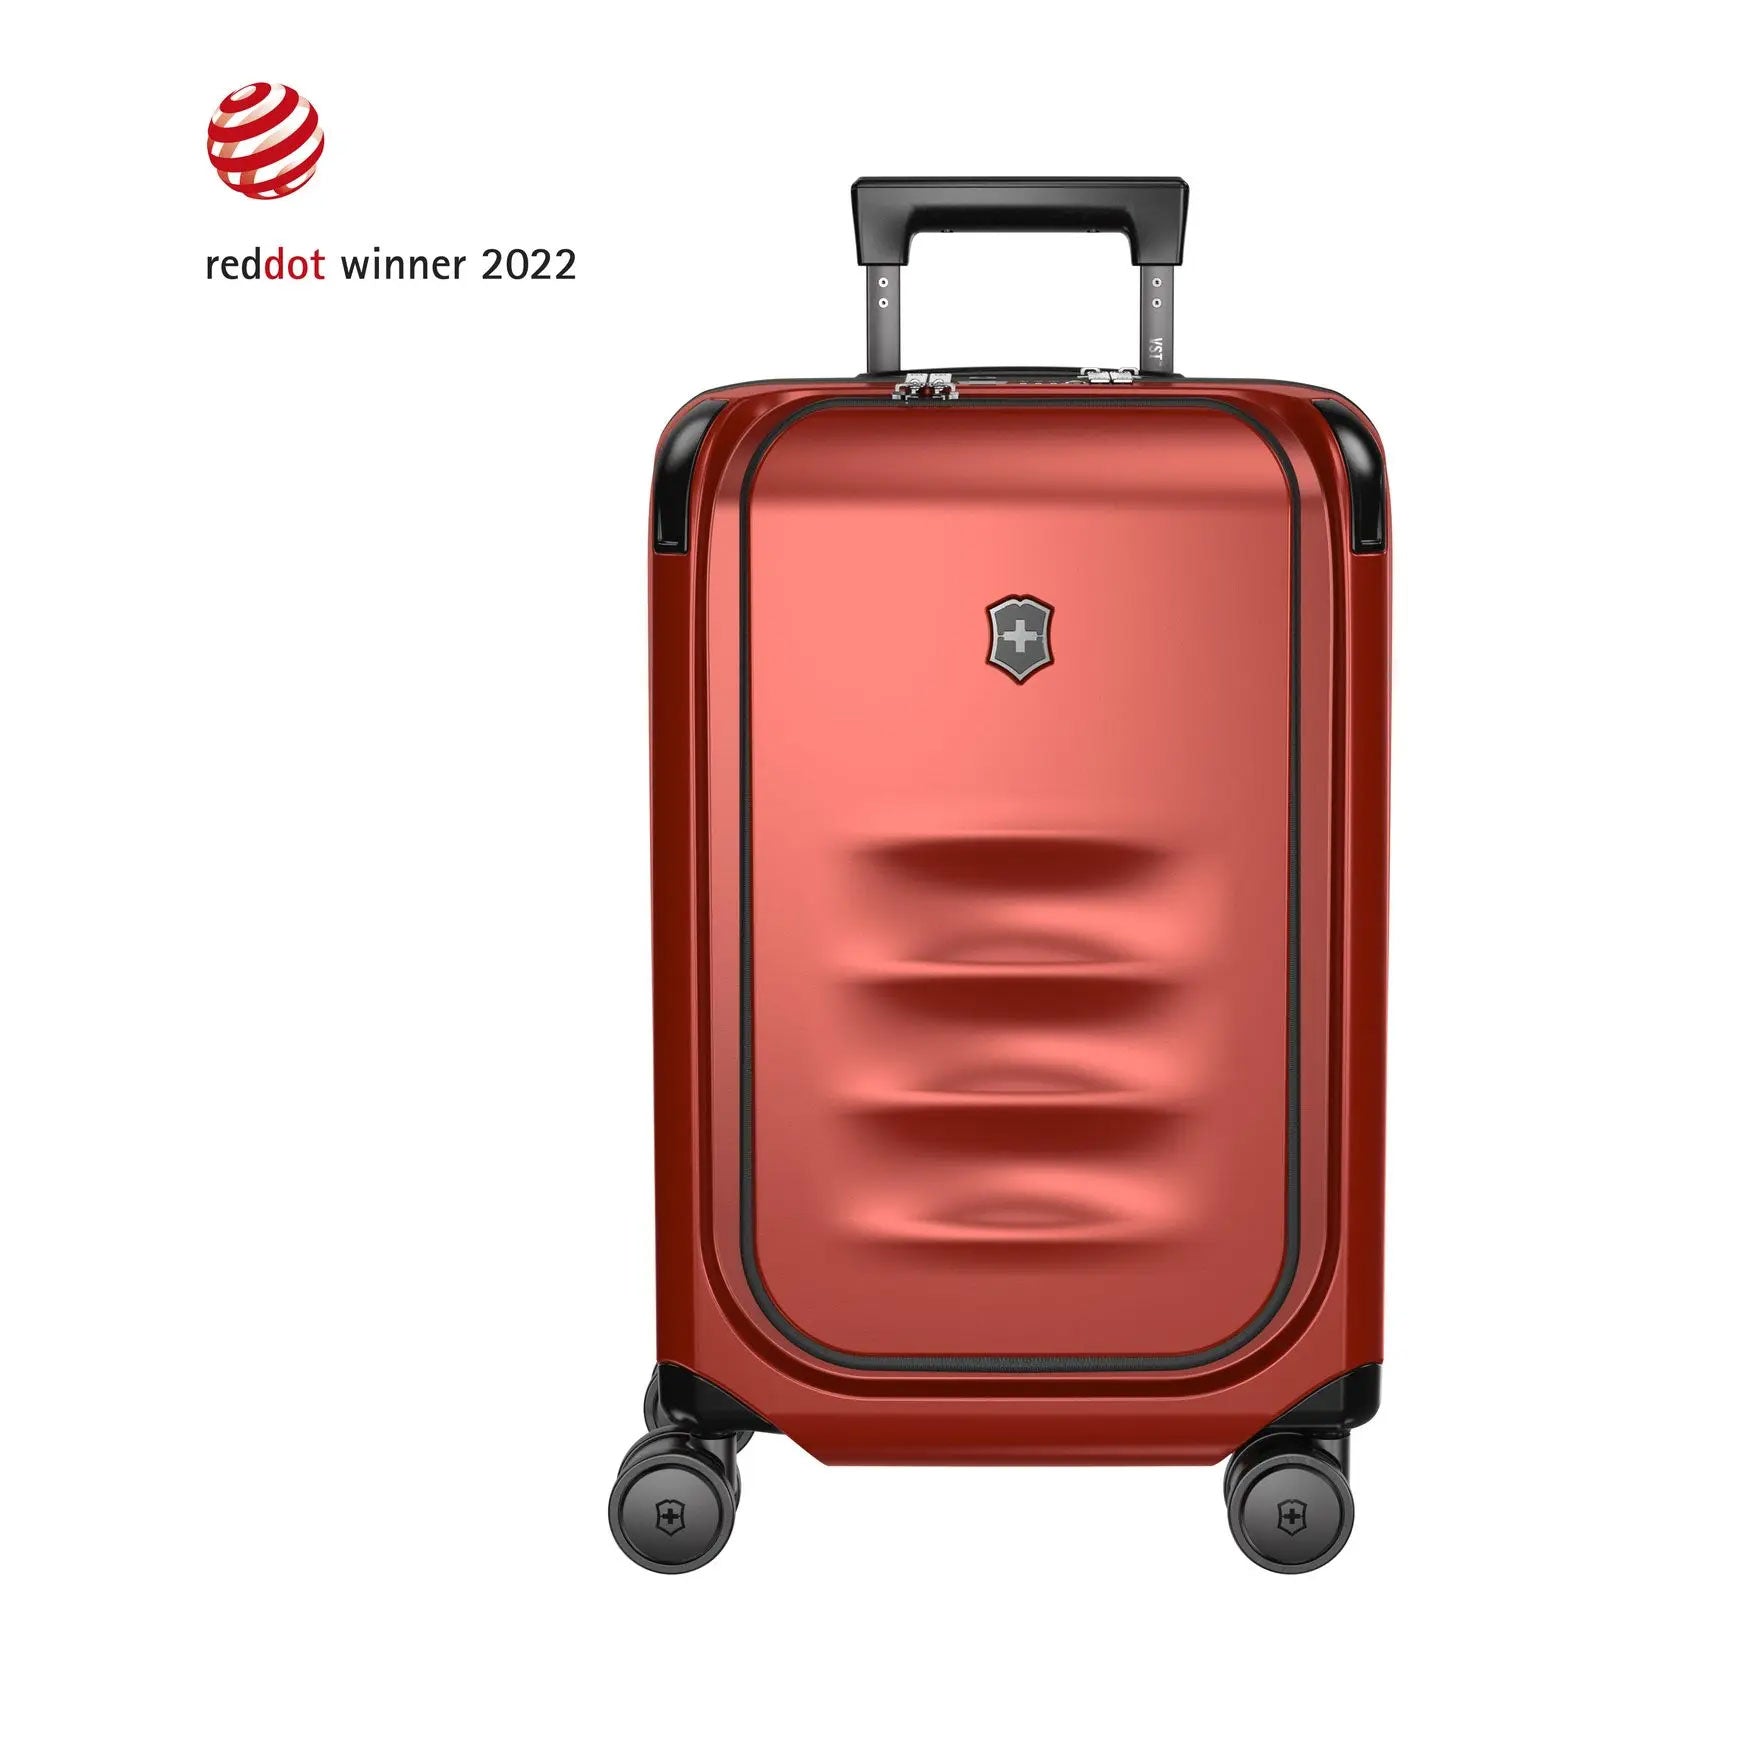 Victorinox Swiss Army Spectra 3.0 Frequent Flyer Carry-On